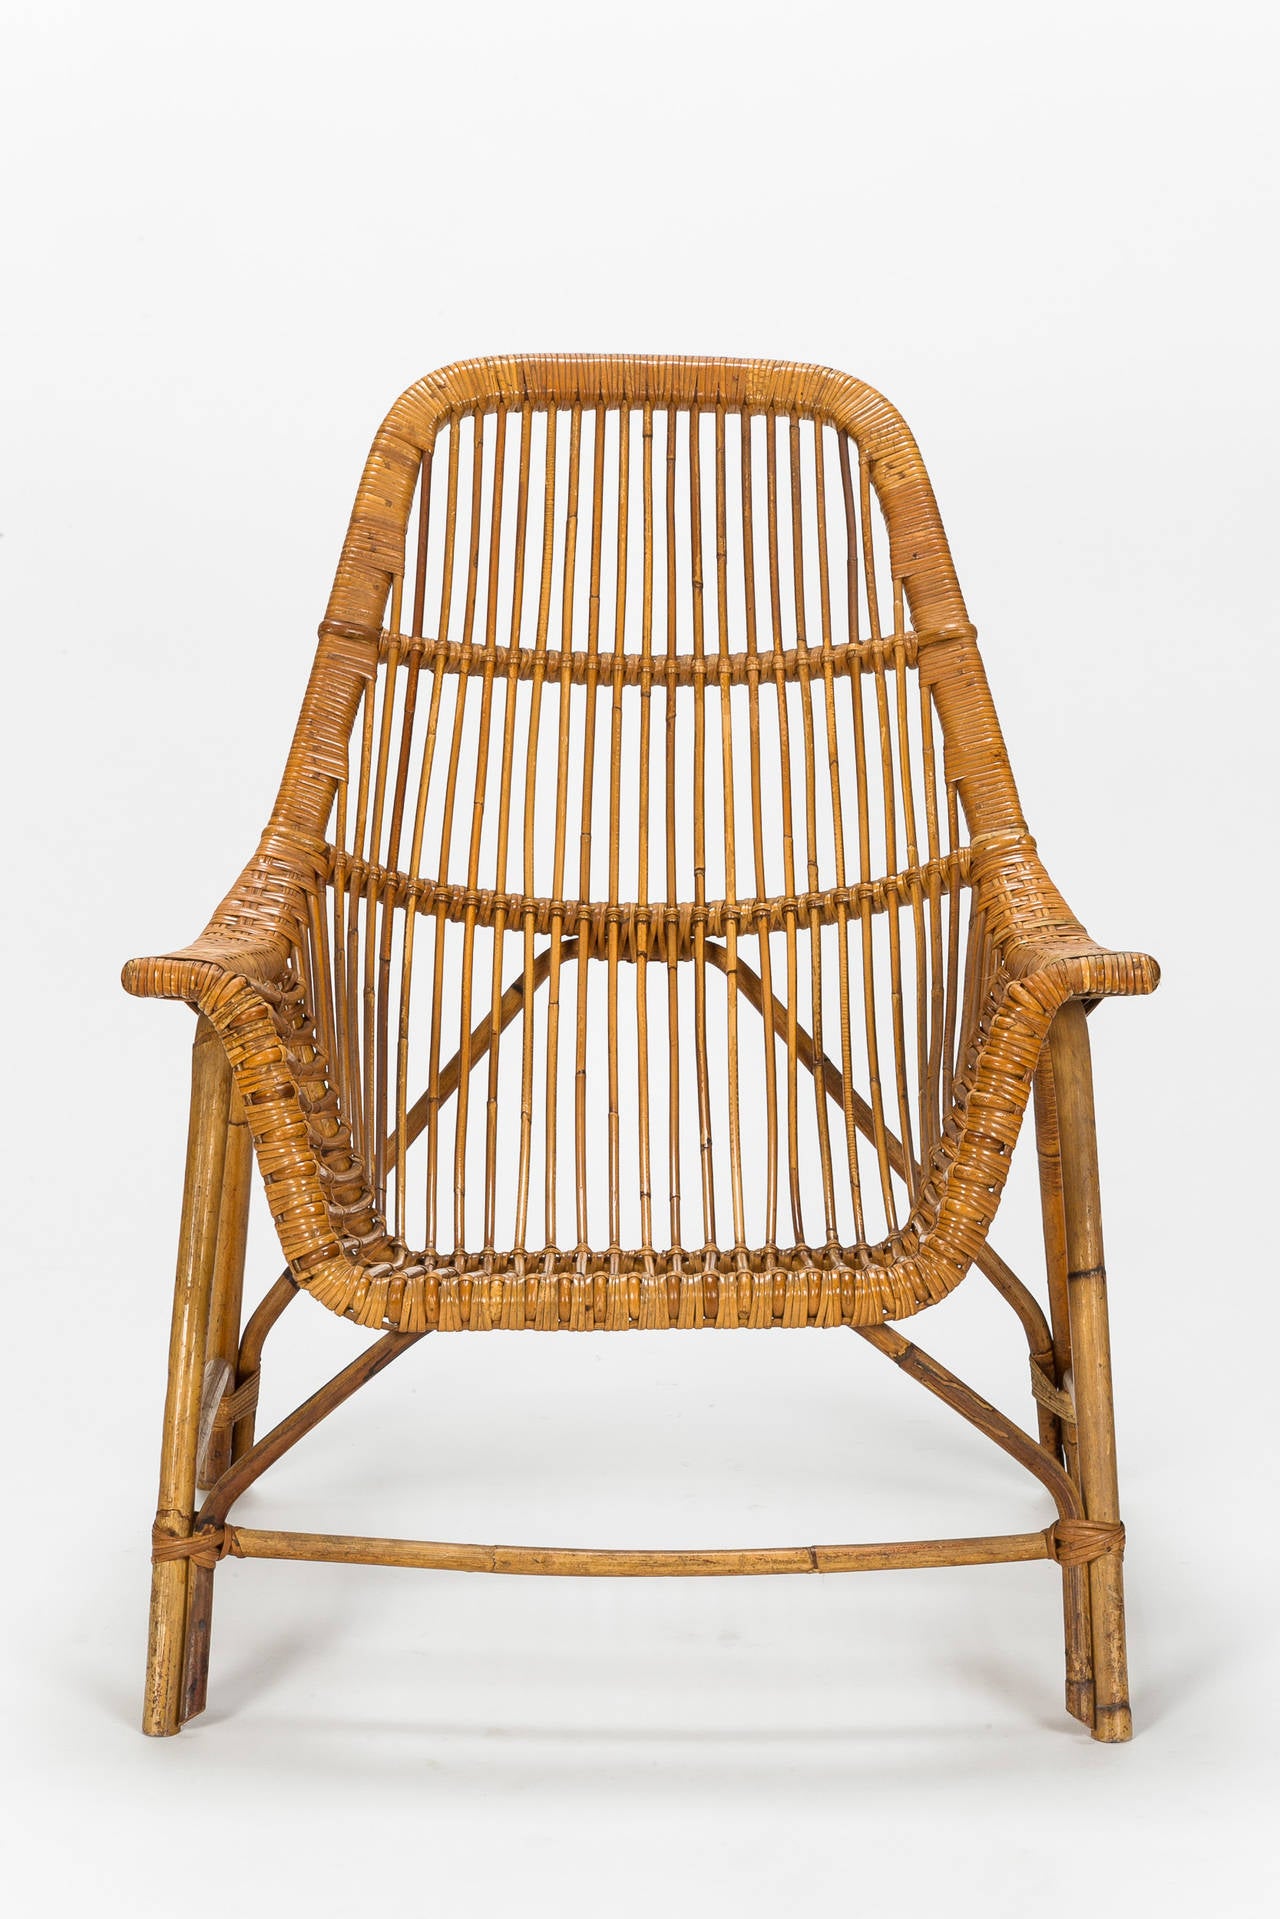 Woven Pair of Italian Wicker Chairs by George Coslin, 1956